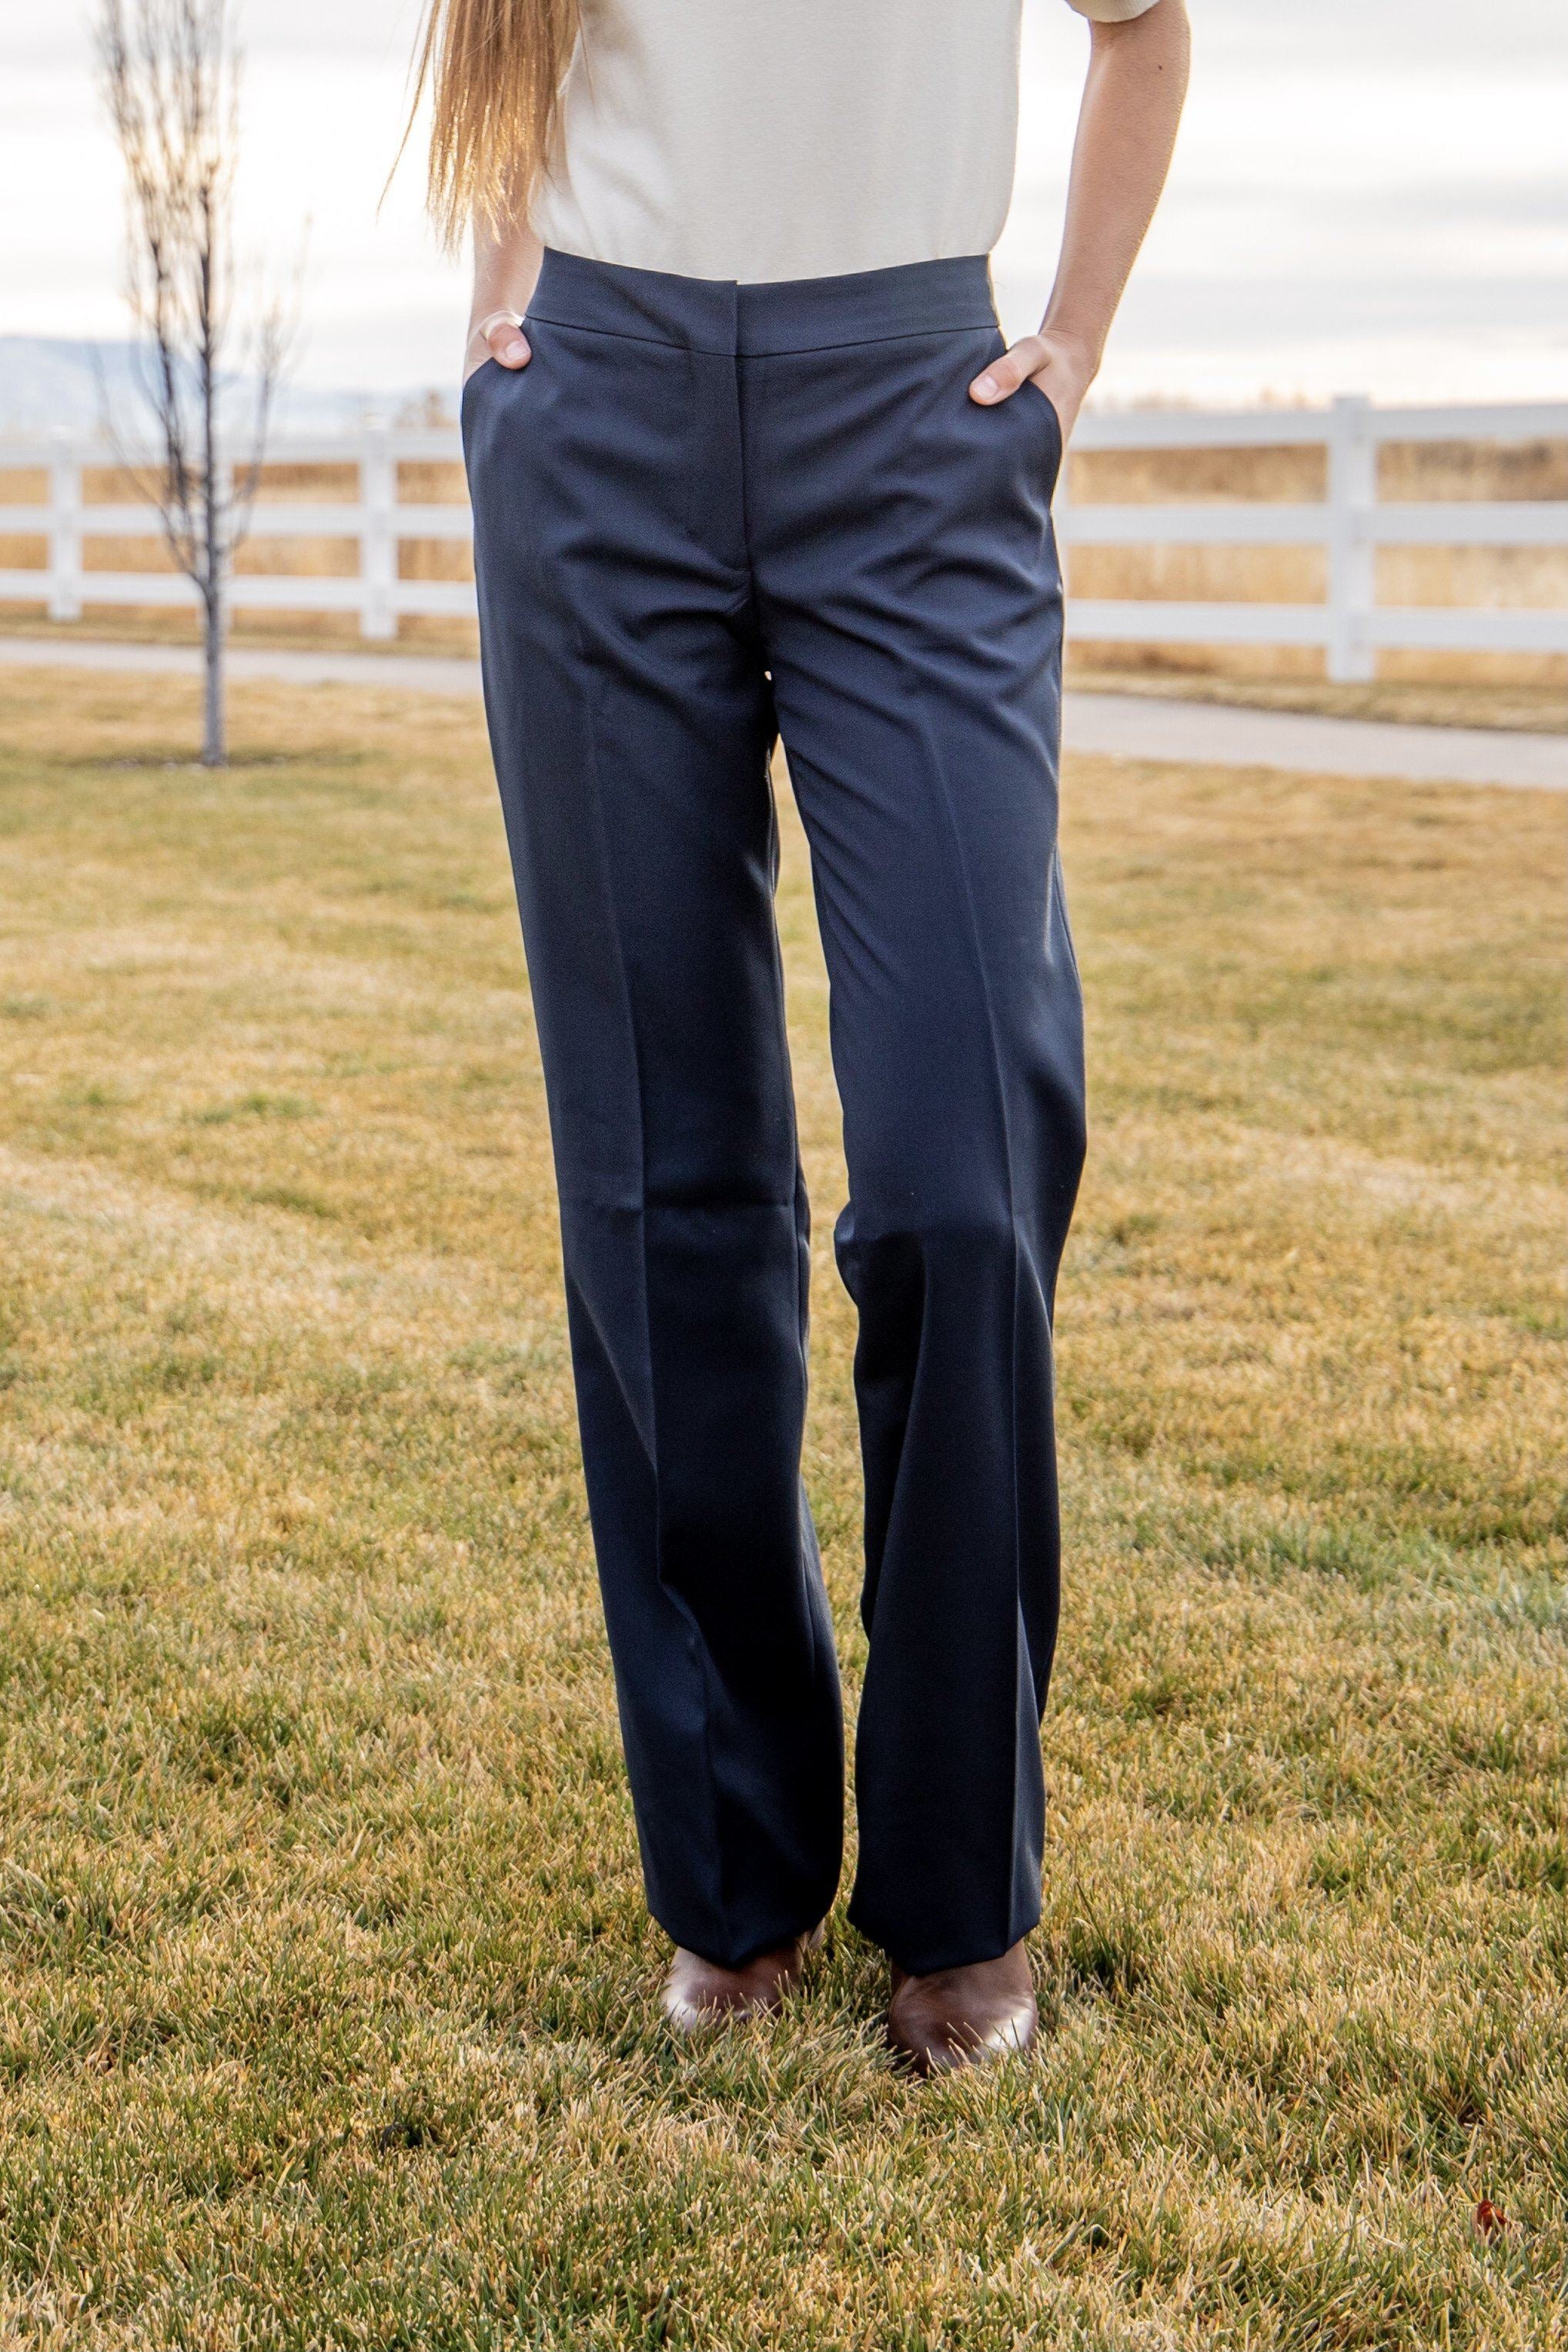 navy blue dress pants for woman